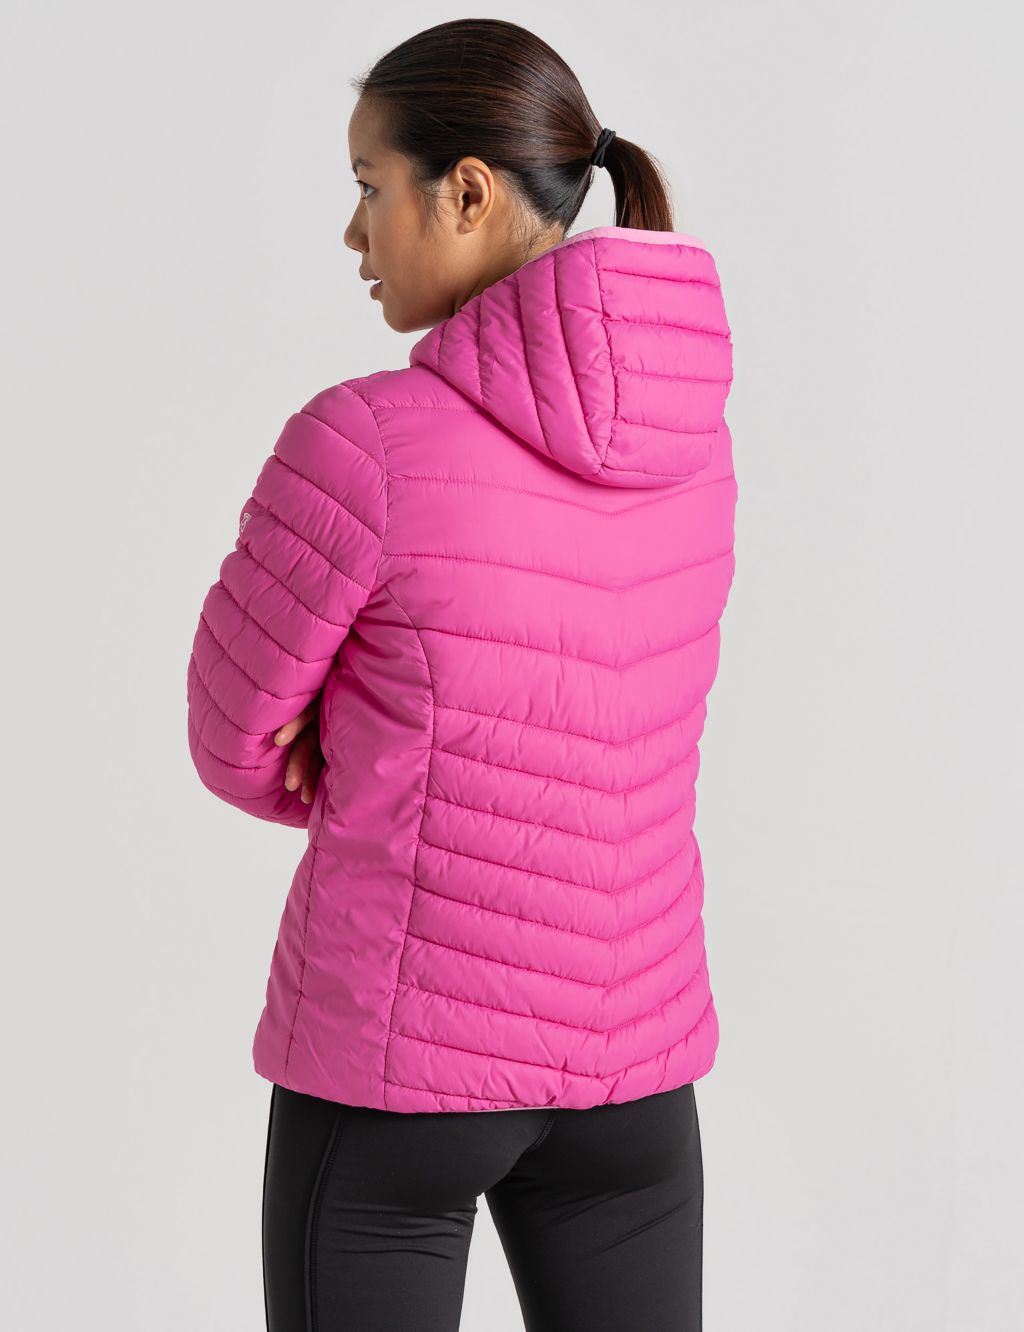 Quilted Hooded Short Puffer Jacket image 2